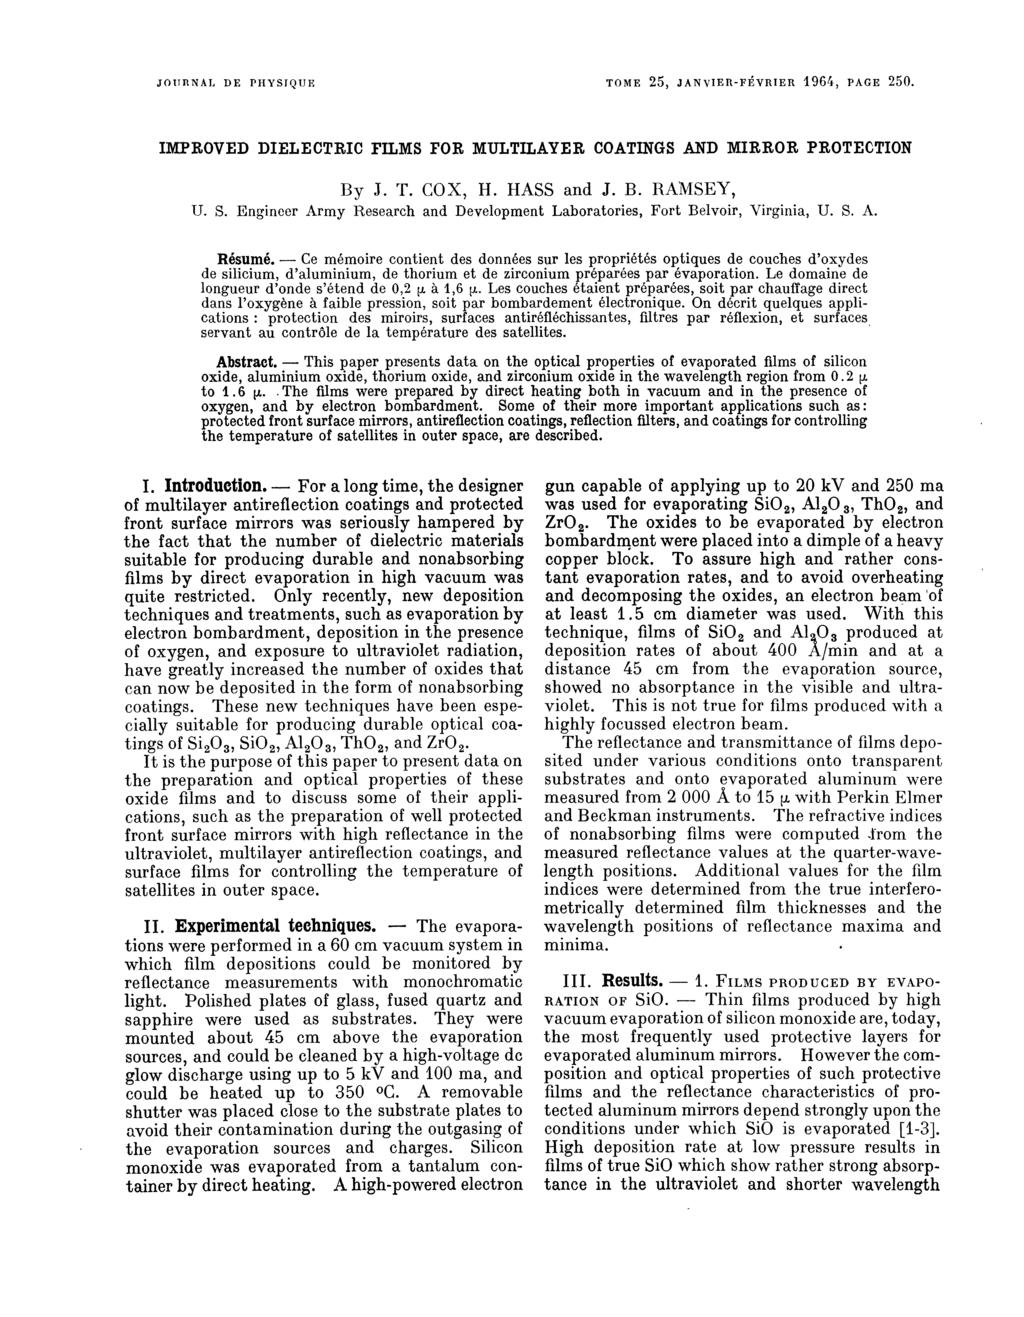 Ce For This 1. Thin JOURNAL DE PHYSIQUE TOME 25, JANVIERFÉVRIER 1964, 250 IMPROVED DIELECTRIC FILMS FOR MULTILAYER COATINGS AND MIRROR PROTECTION By J. T. COX, H. HASS and J. B. RAMSEY, U. S.